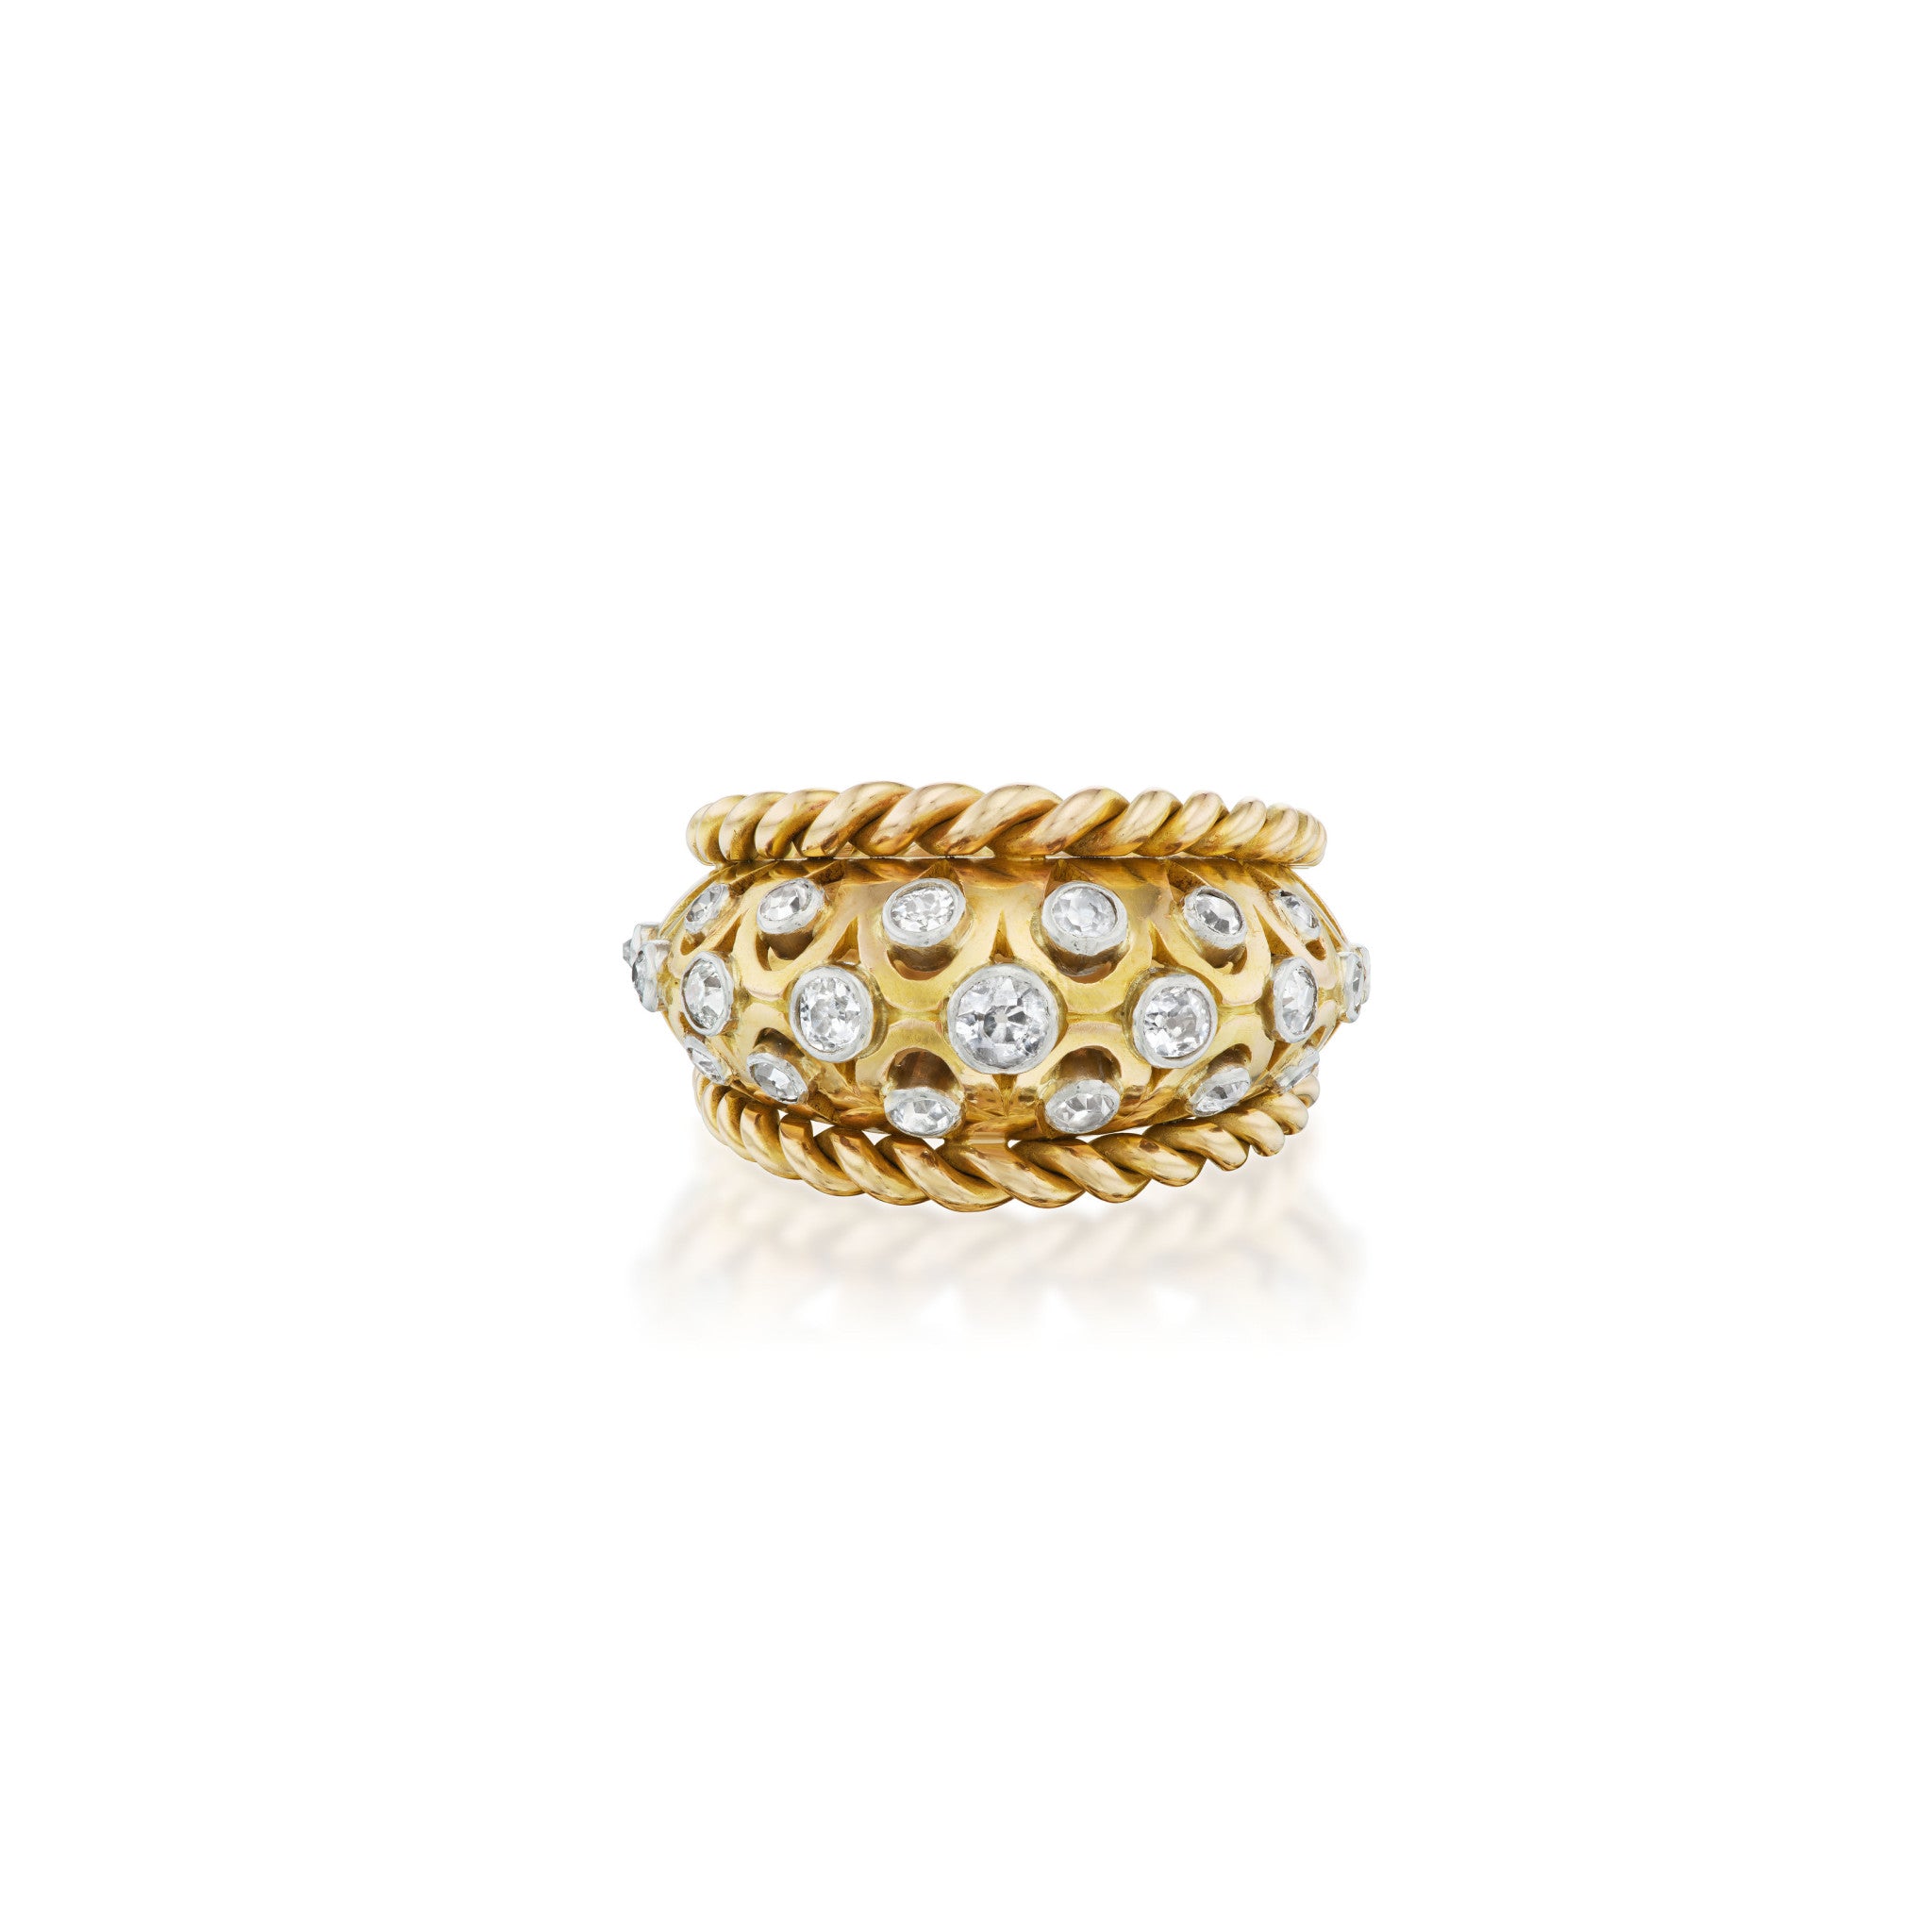 French 1960s 18KT Yellow Gold Diamond Ring